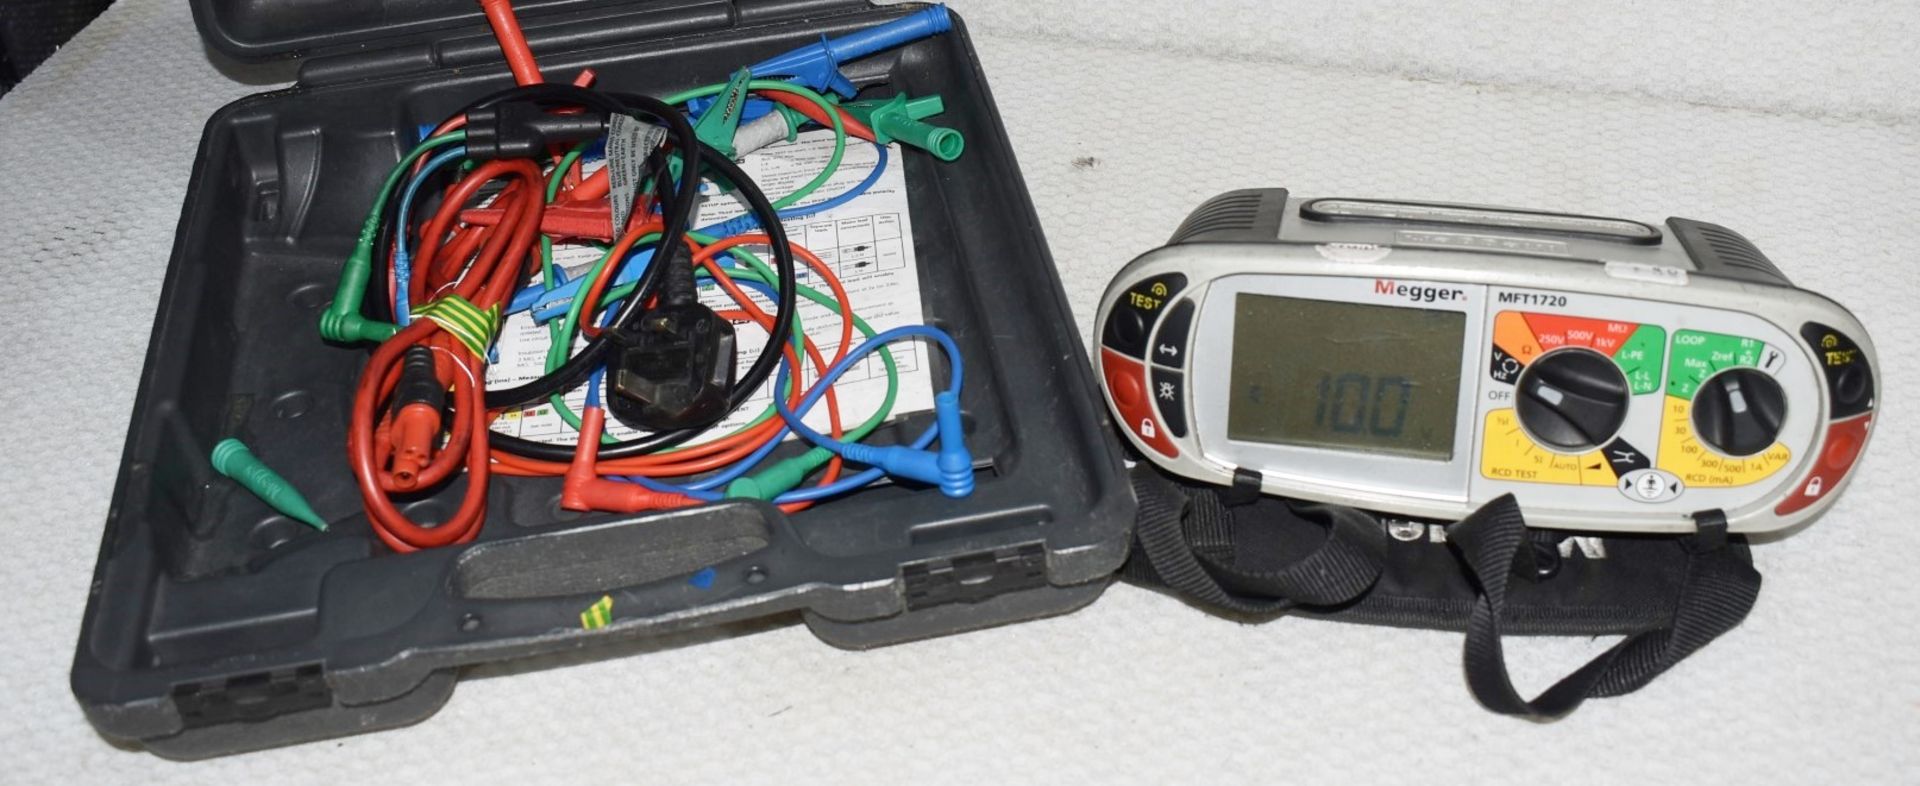 1 x MEGGER MFT1720 Multifunction Tester With Auto 3-phase RCD Testing - Includes Carry Case - - Image 2 of 2